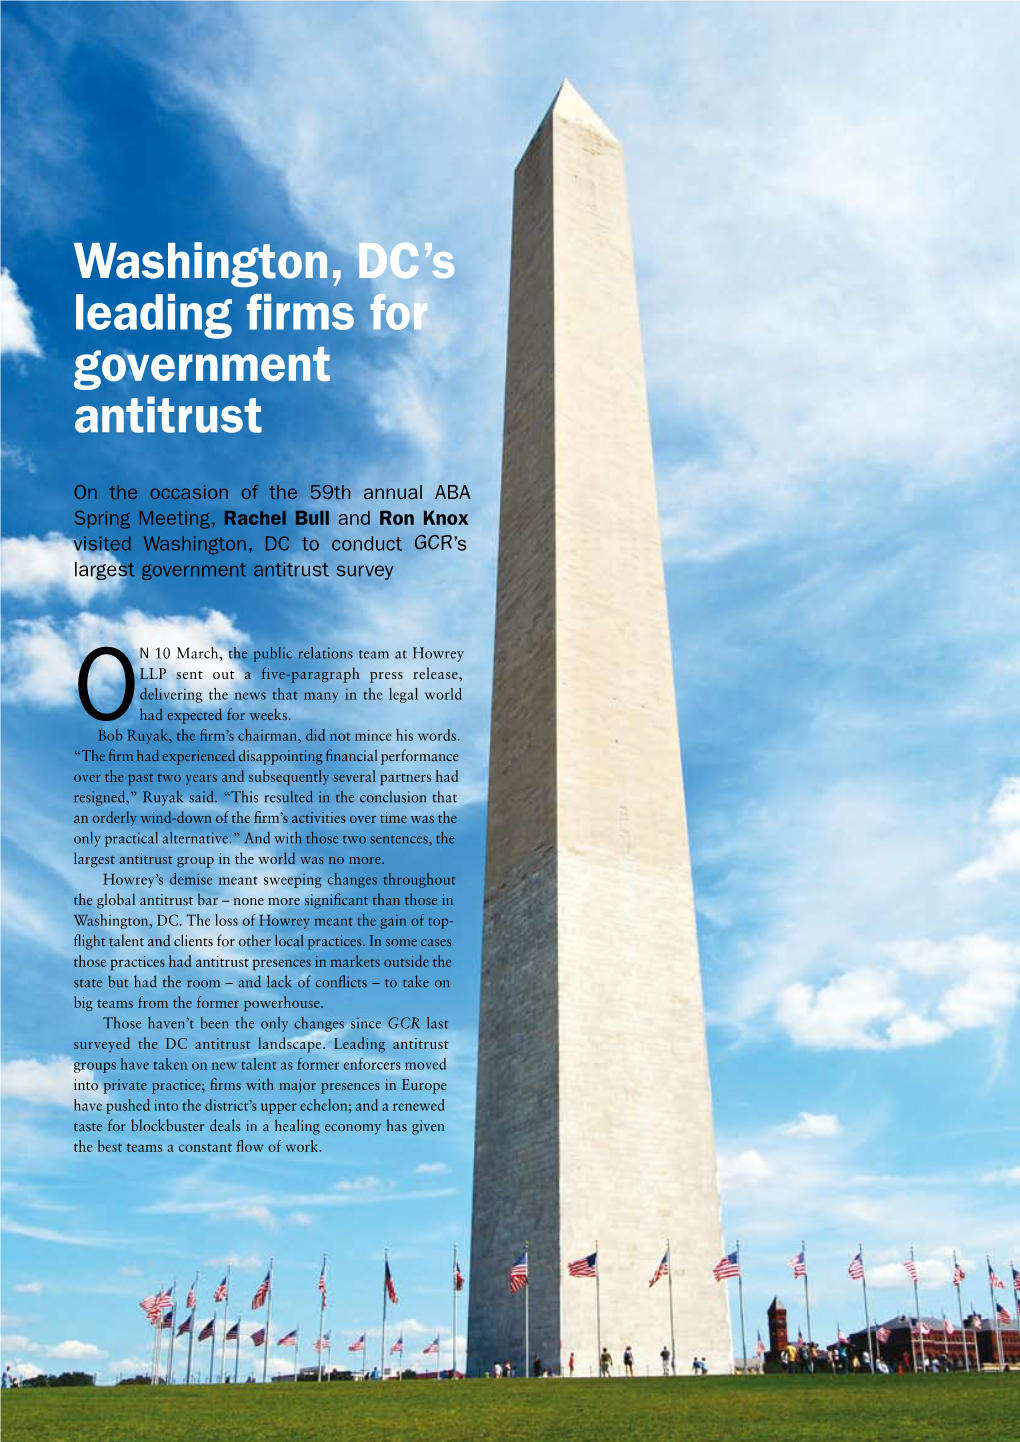 Washington, DC's Leading Firms for Government Antitrust